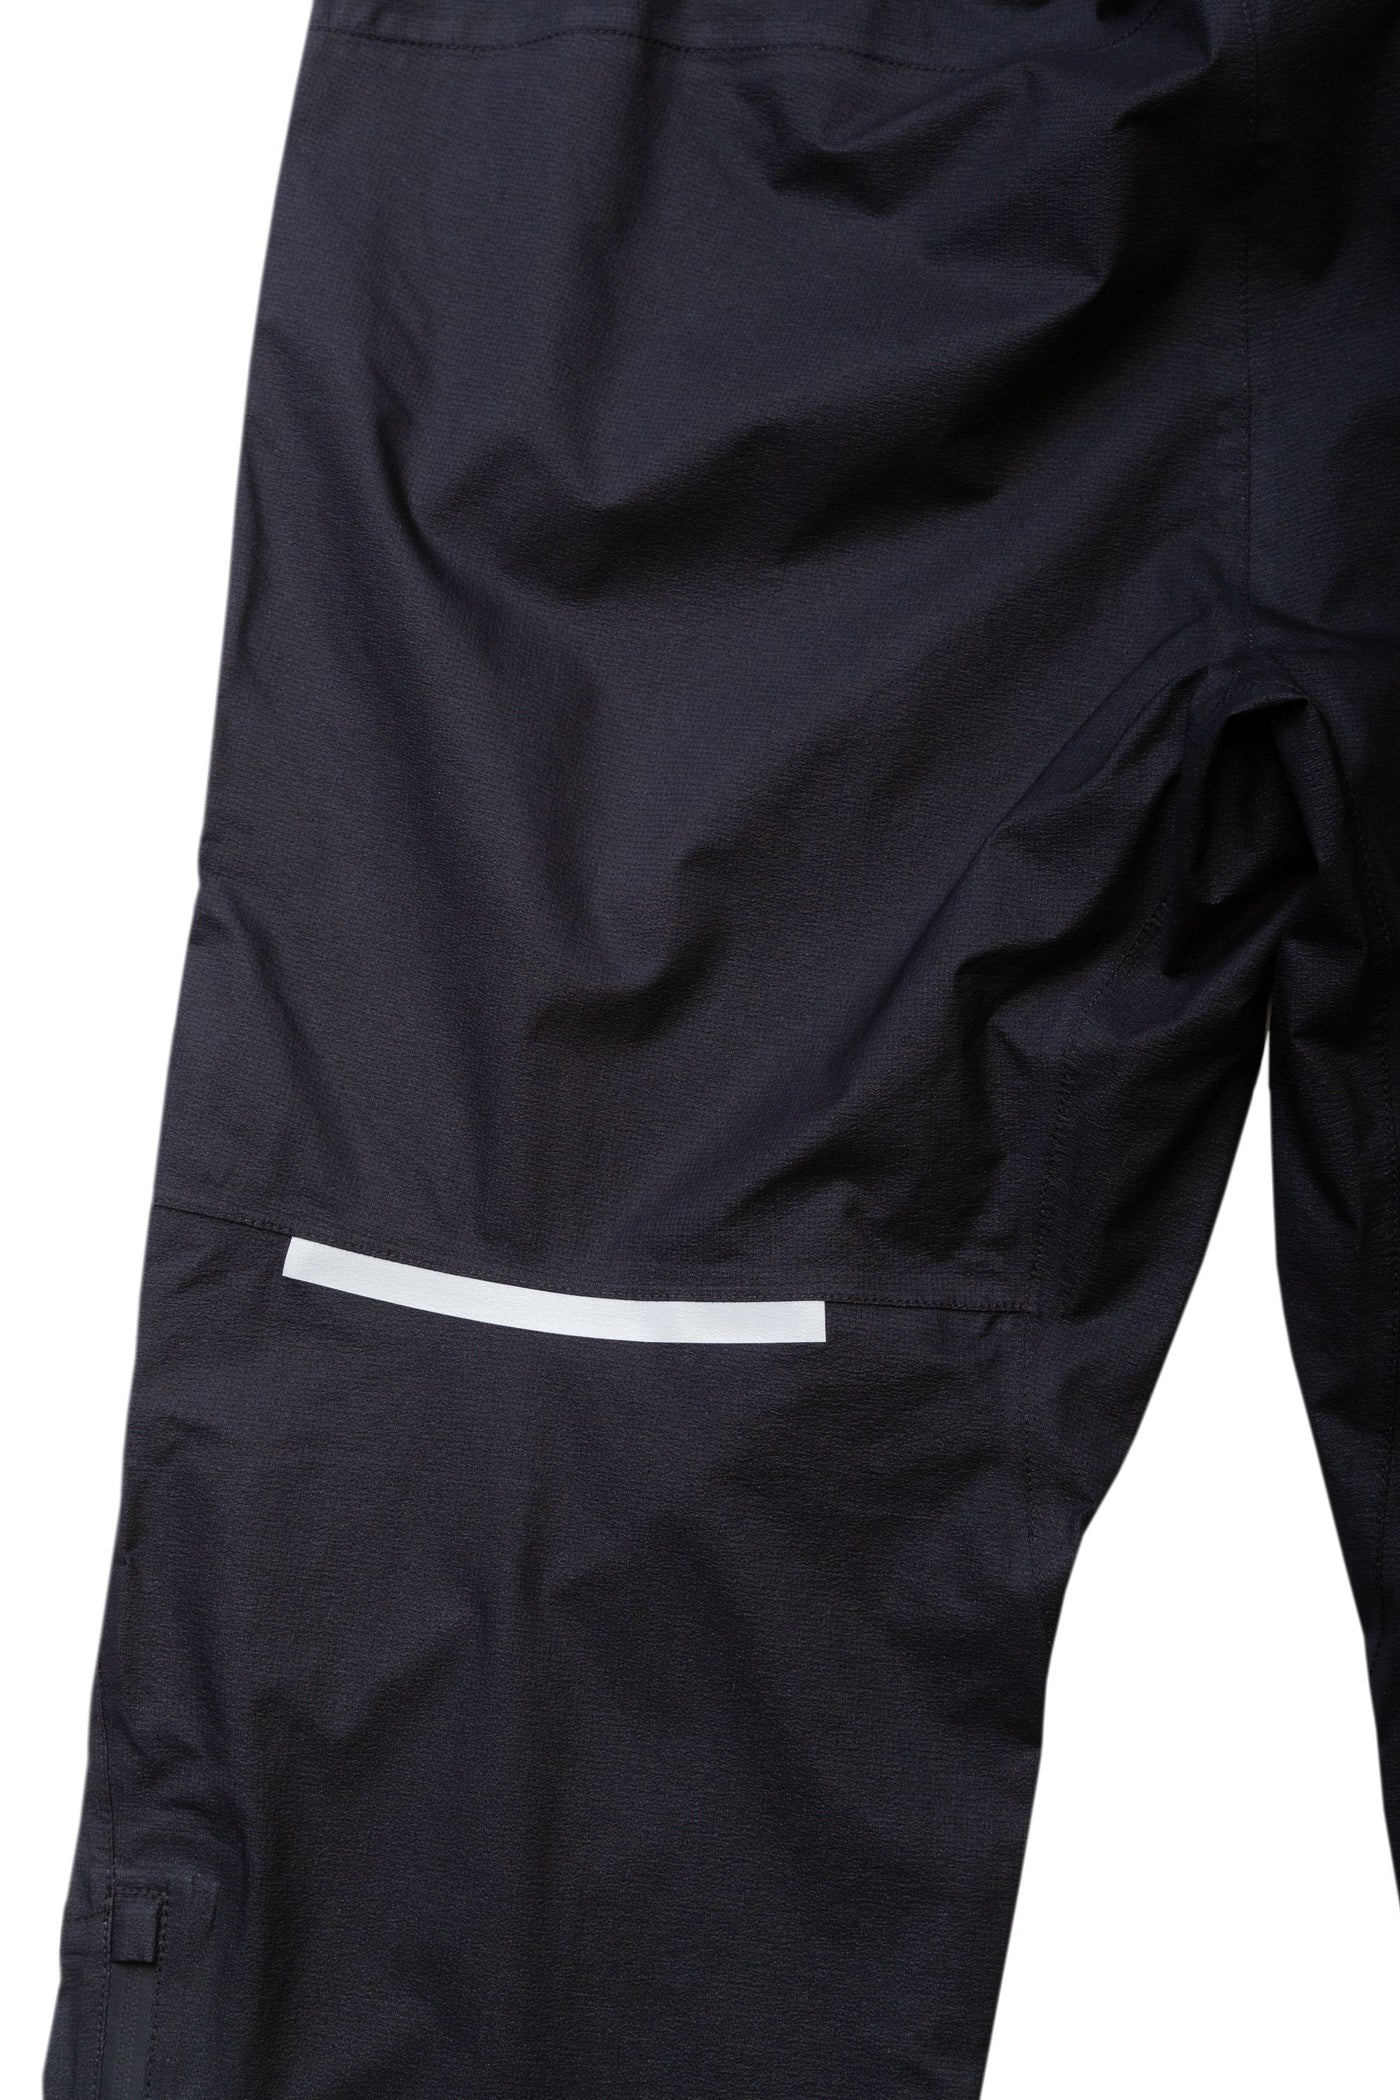 RonHill Unisex Tech Fortify Pant - All Black